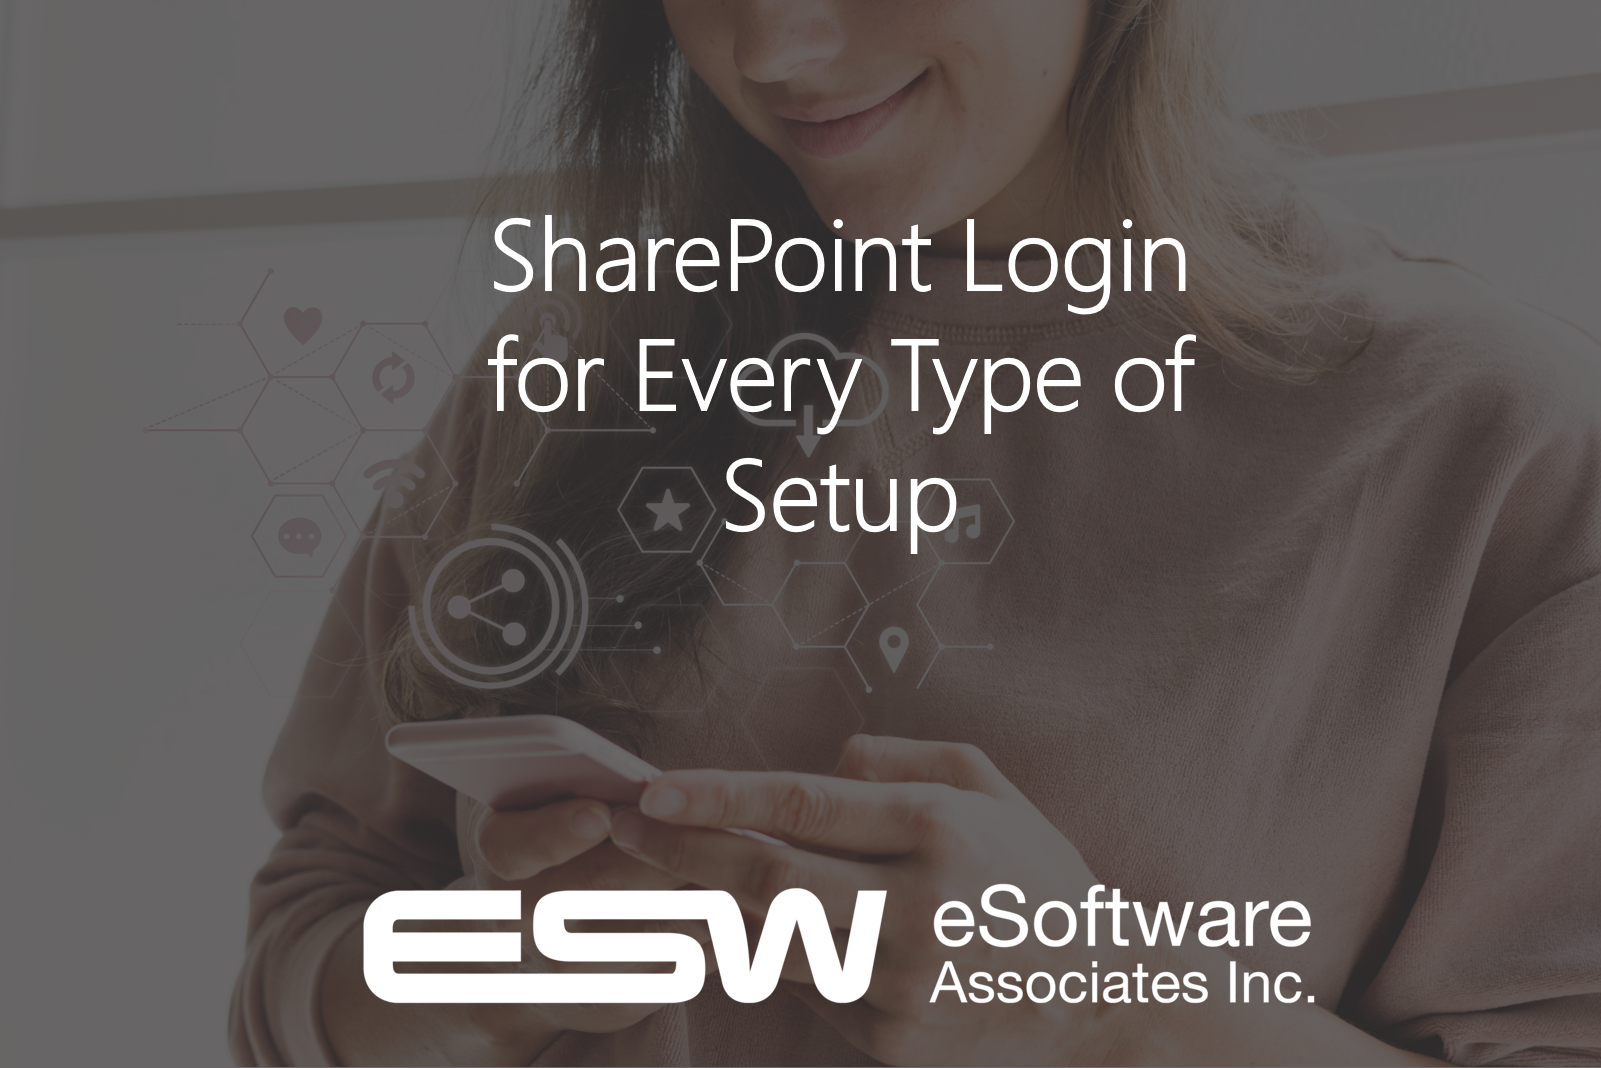 Guide for Microsoft SharePoint Login